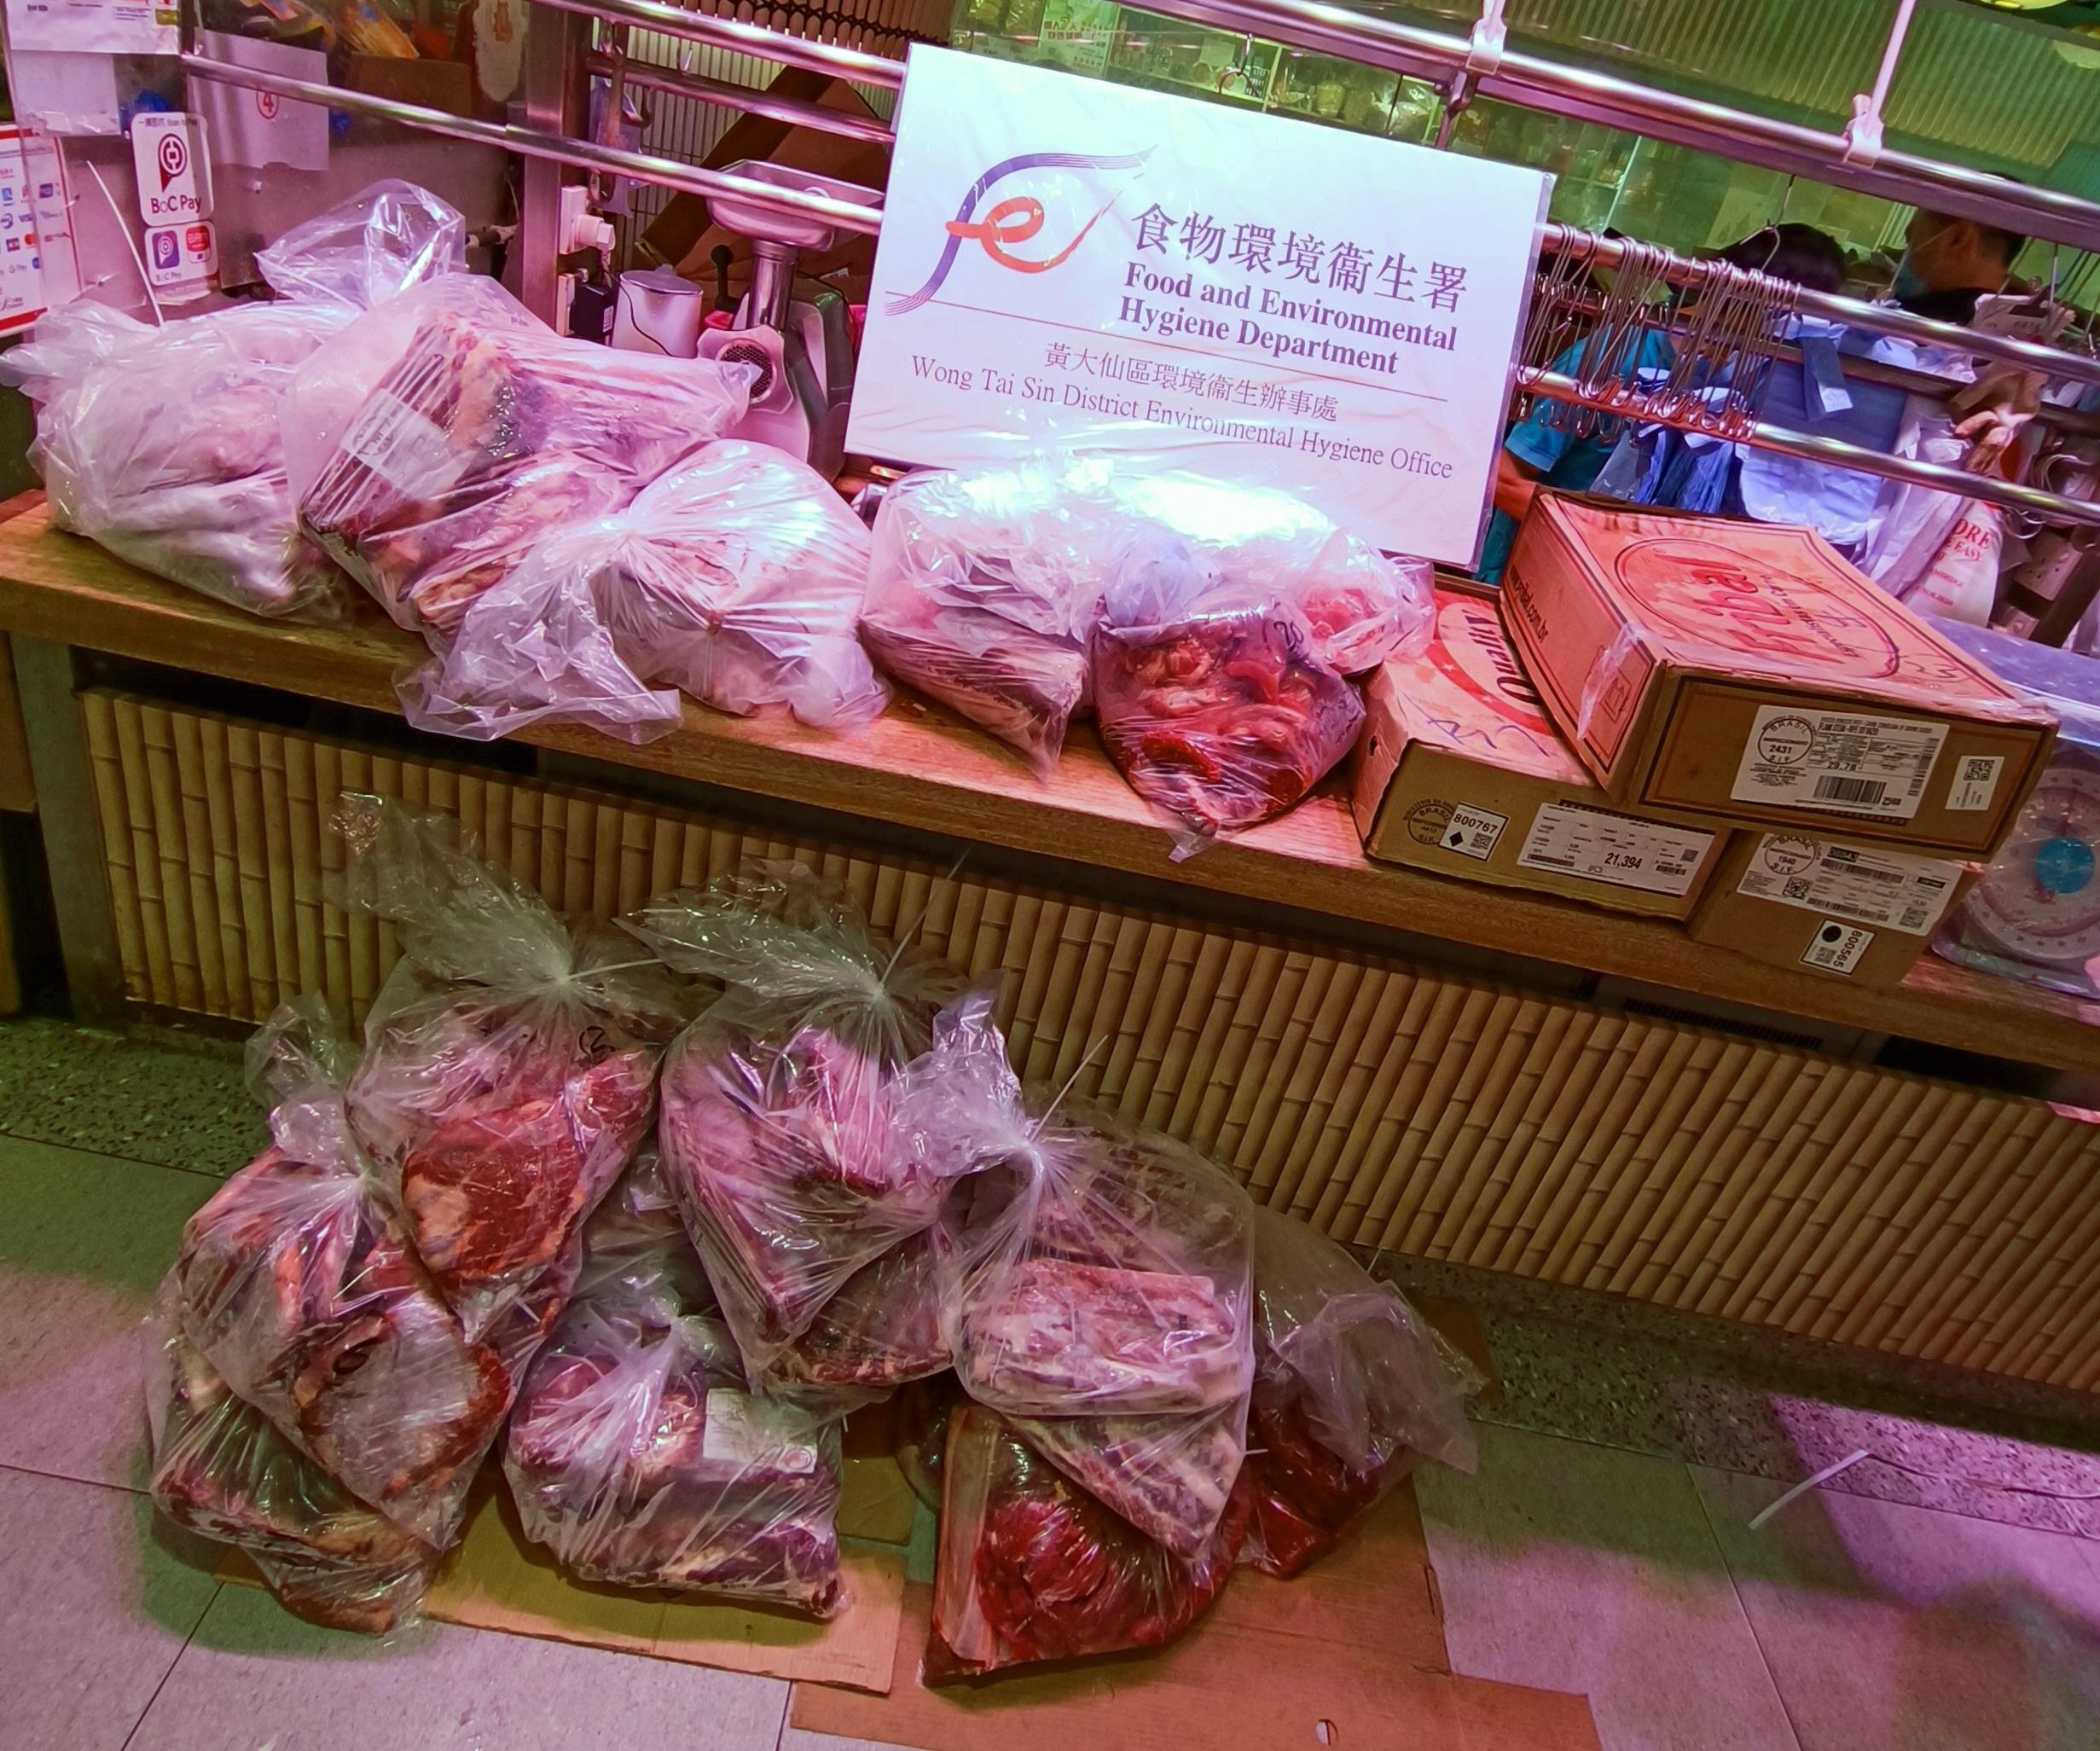 The Food and Environmental Hygiene Department (FEHD) raided a licensed fresh provision shop in Wong Tai Sin District suspected of selling frozen meat as fresh meat today (March 23). Photo shows some of the meat seized by FEHD officers during the operation.
